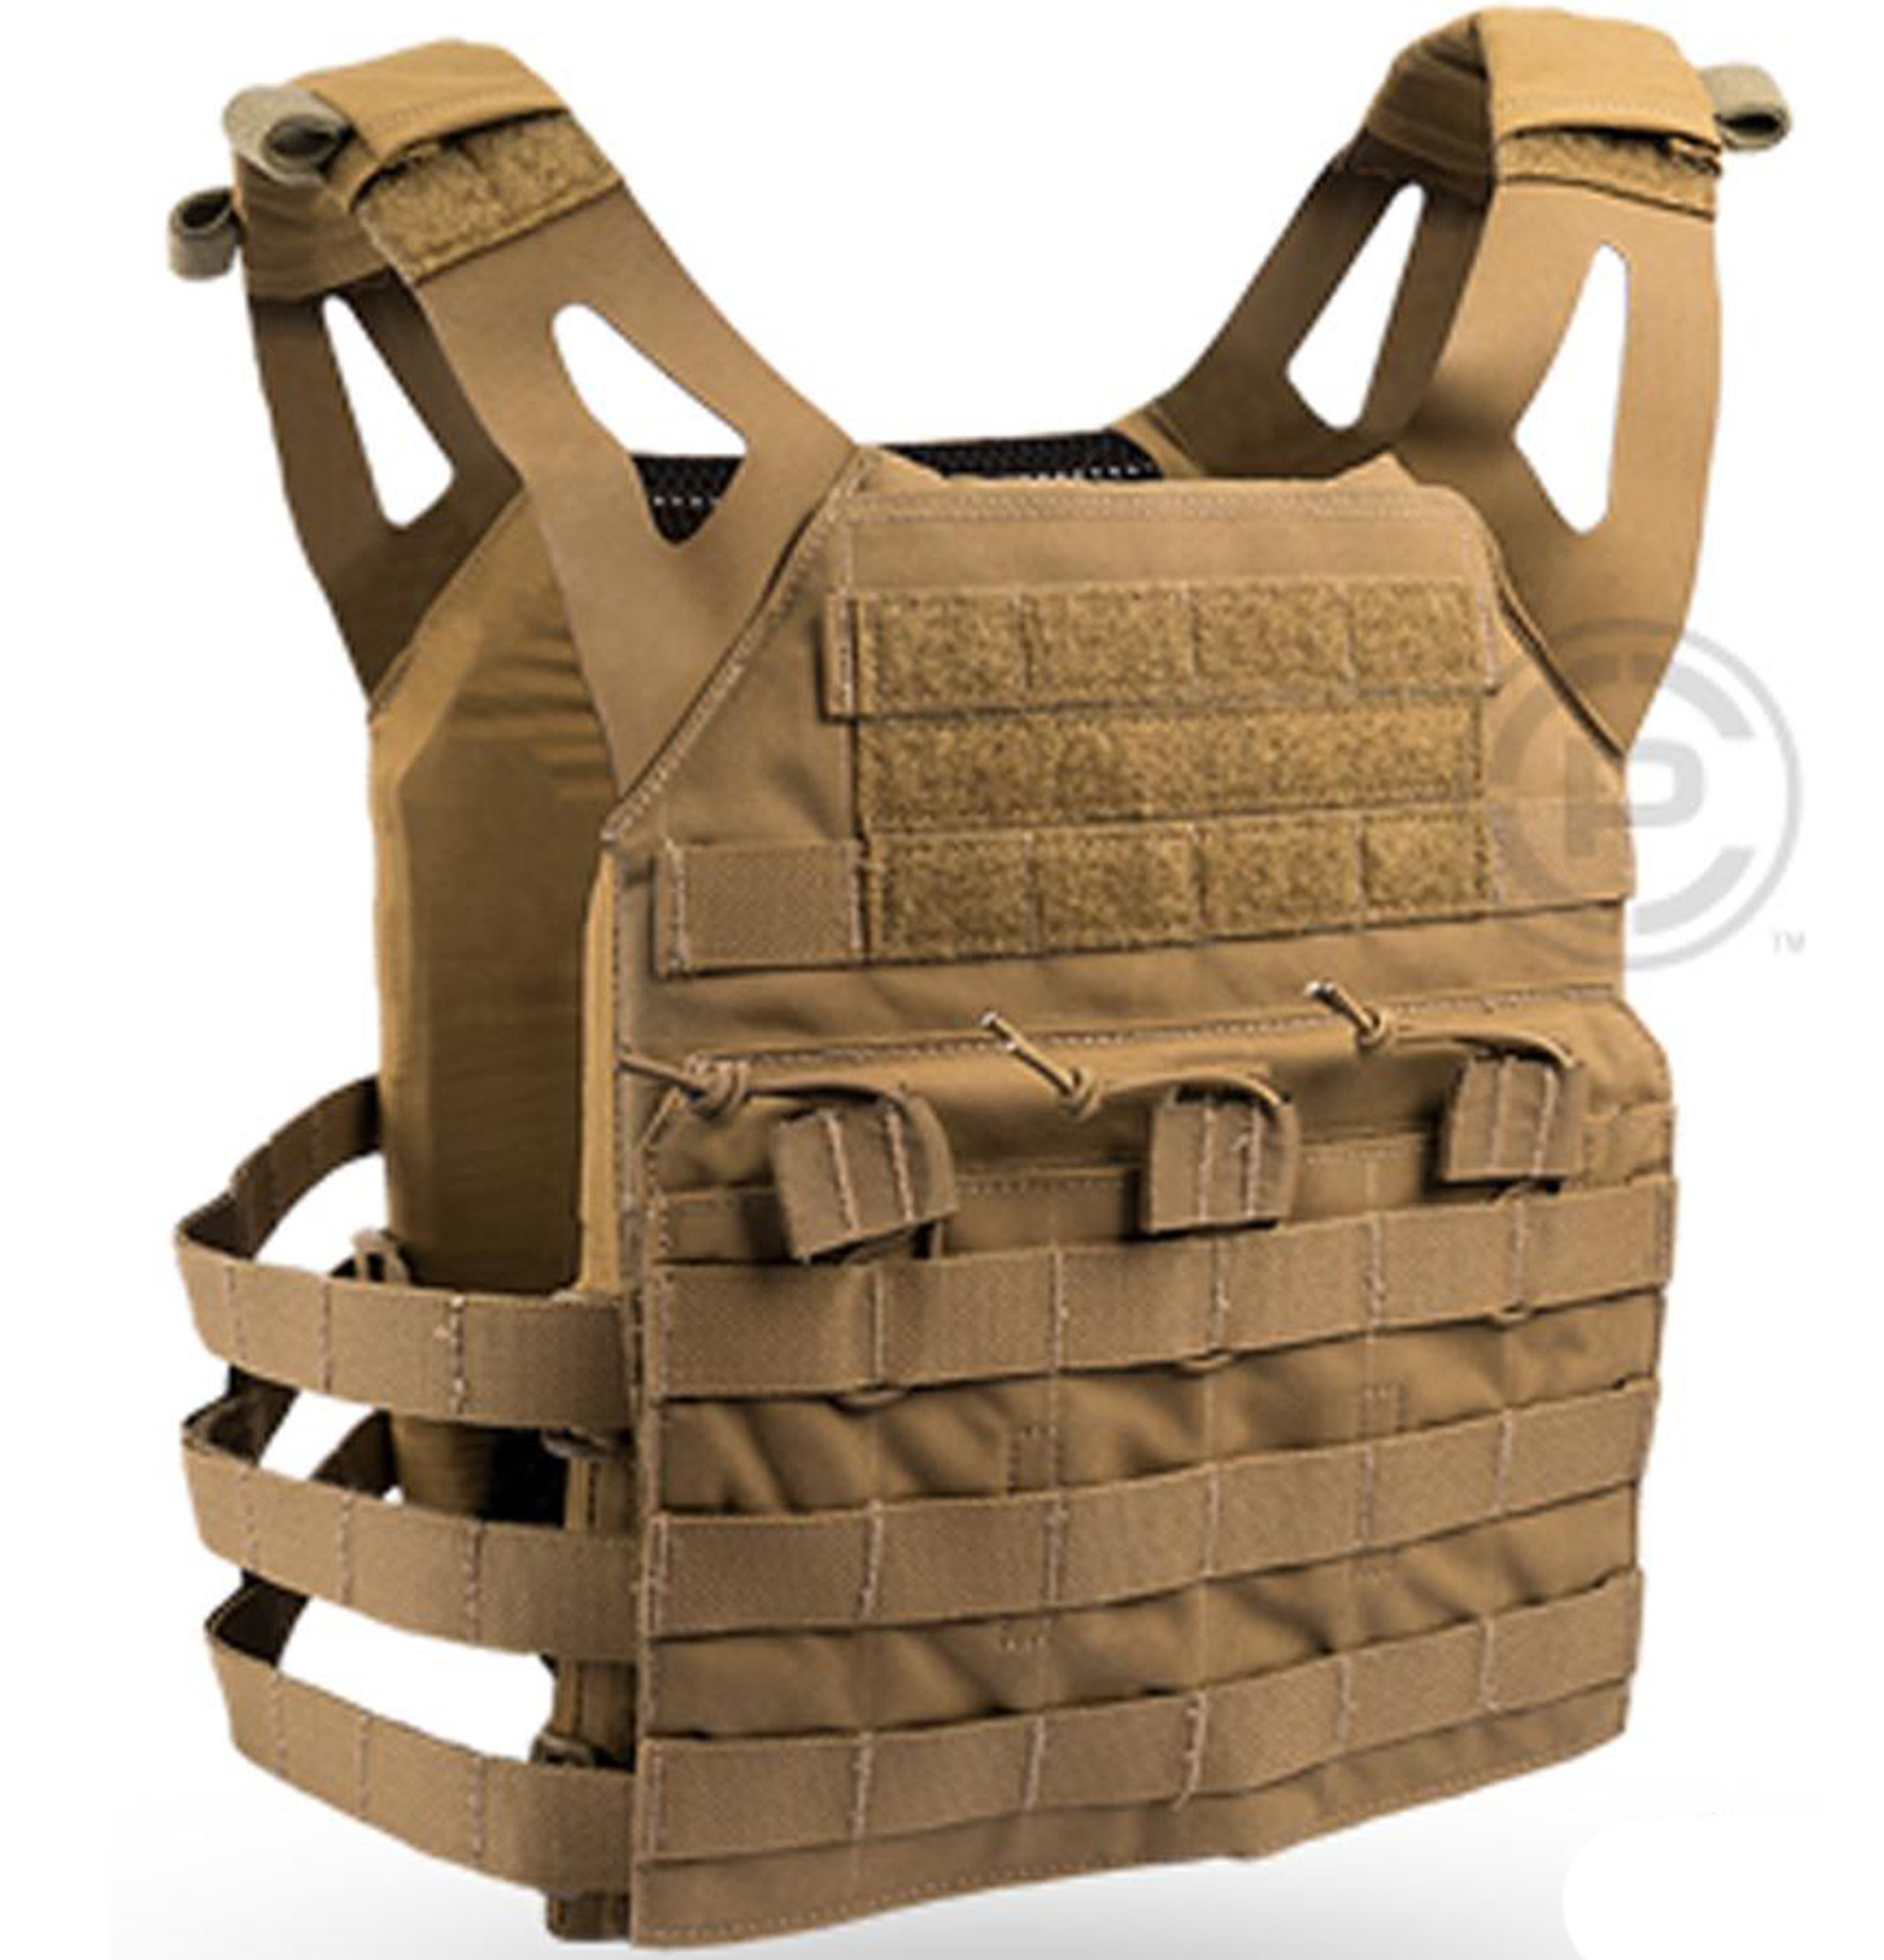 Crye Precision Jumpable Plate Carrier JPC (Color: Coyote)